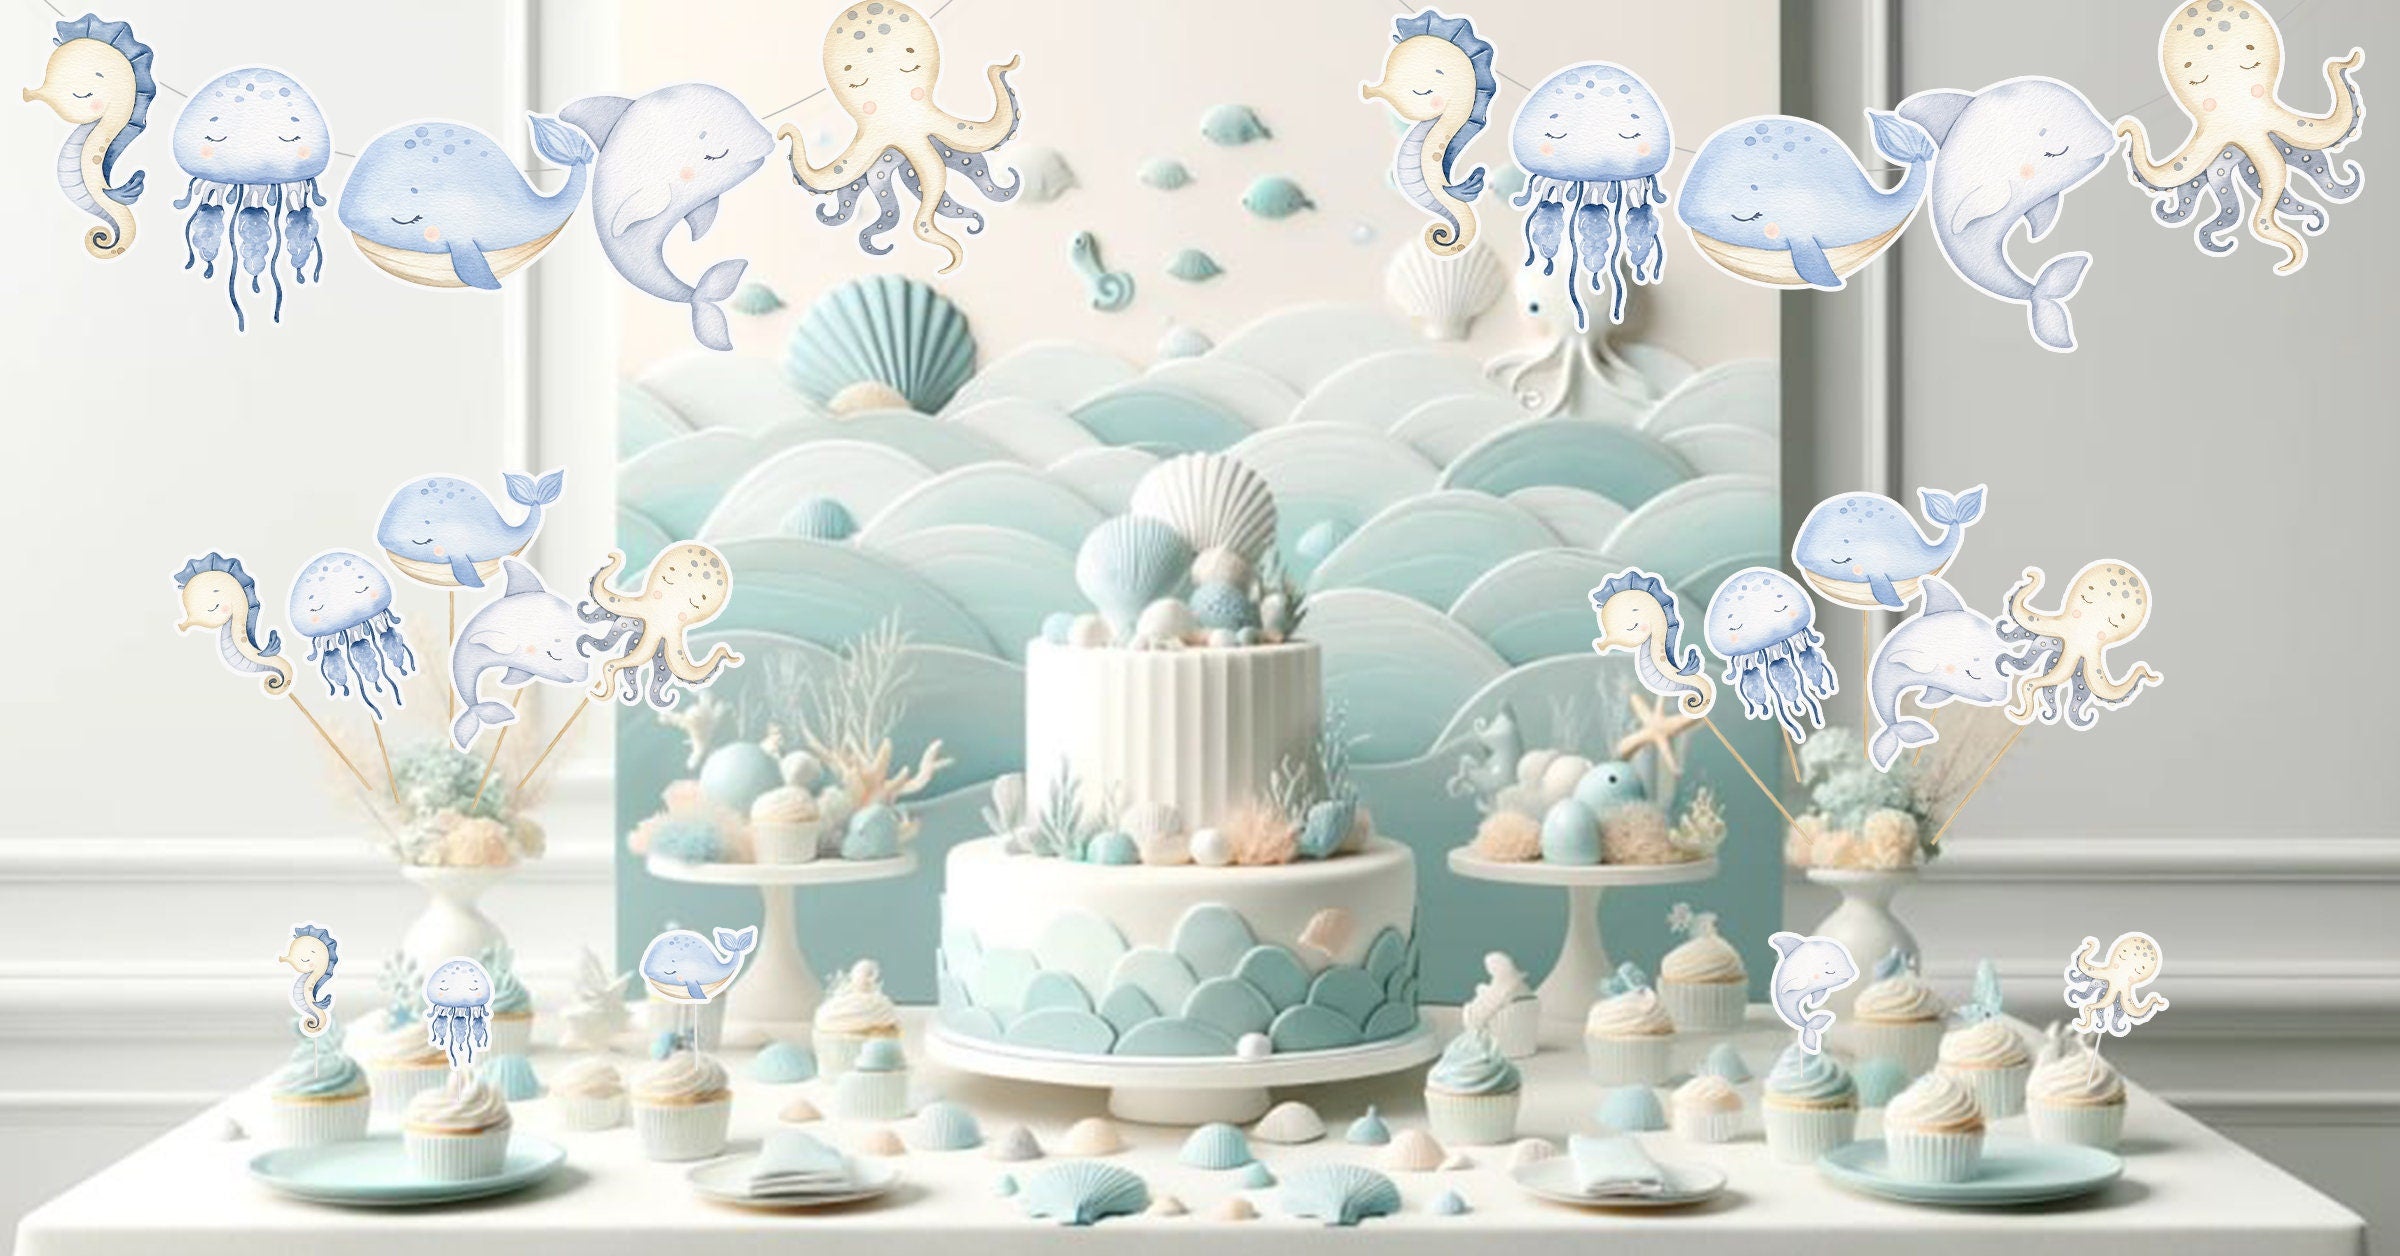 Adorable Under the Sea Cupcake Toppers - Perfect for Ocean-Themed Parties